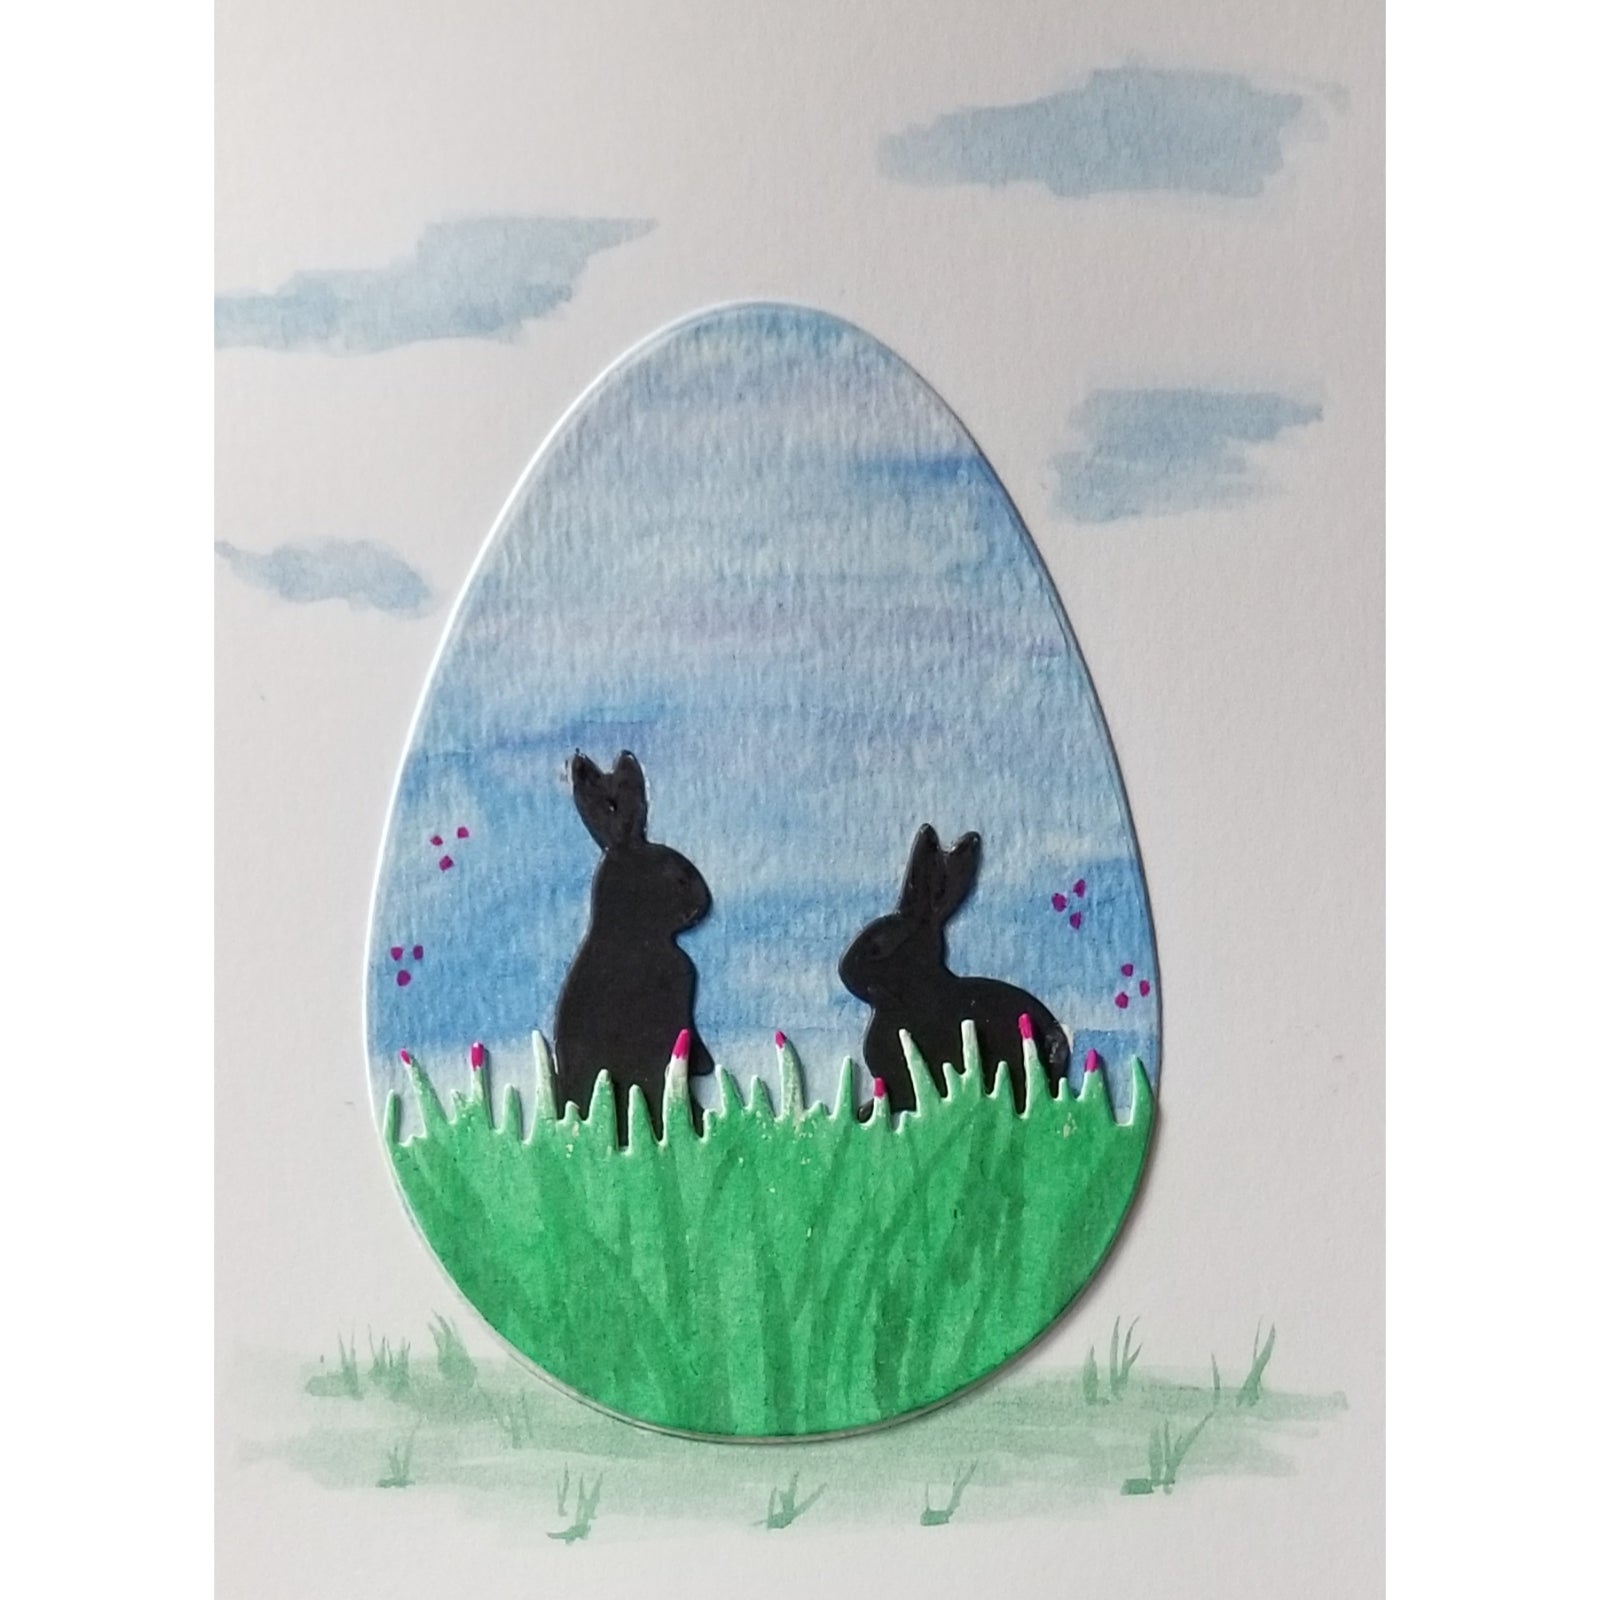 Create Your Own Spring Scene with Large Egg, Grass Background, and Bunnies